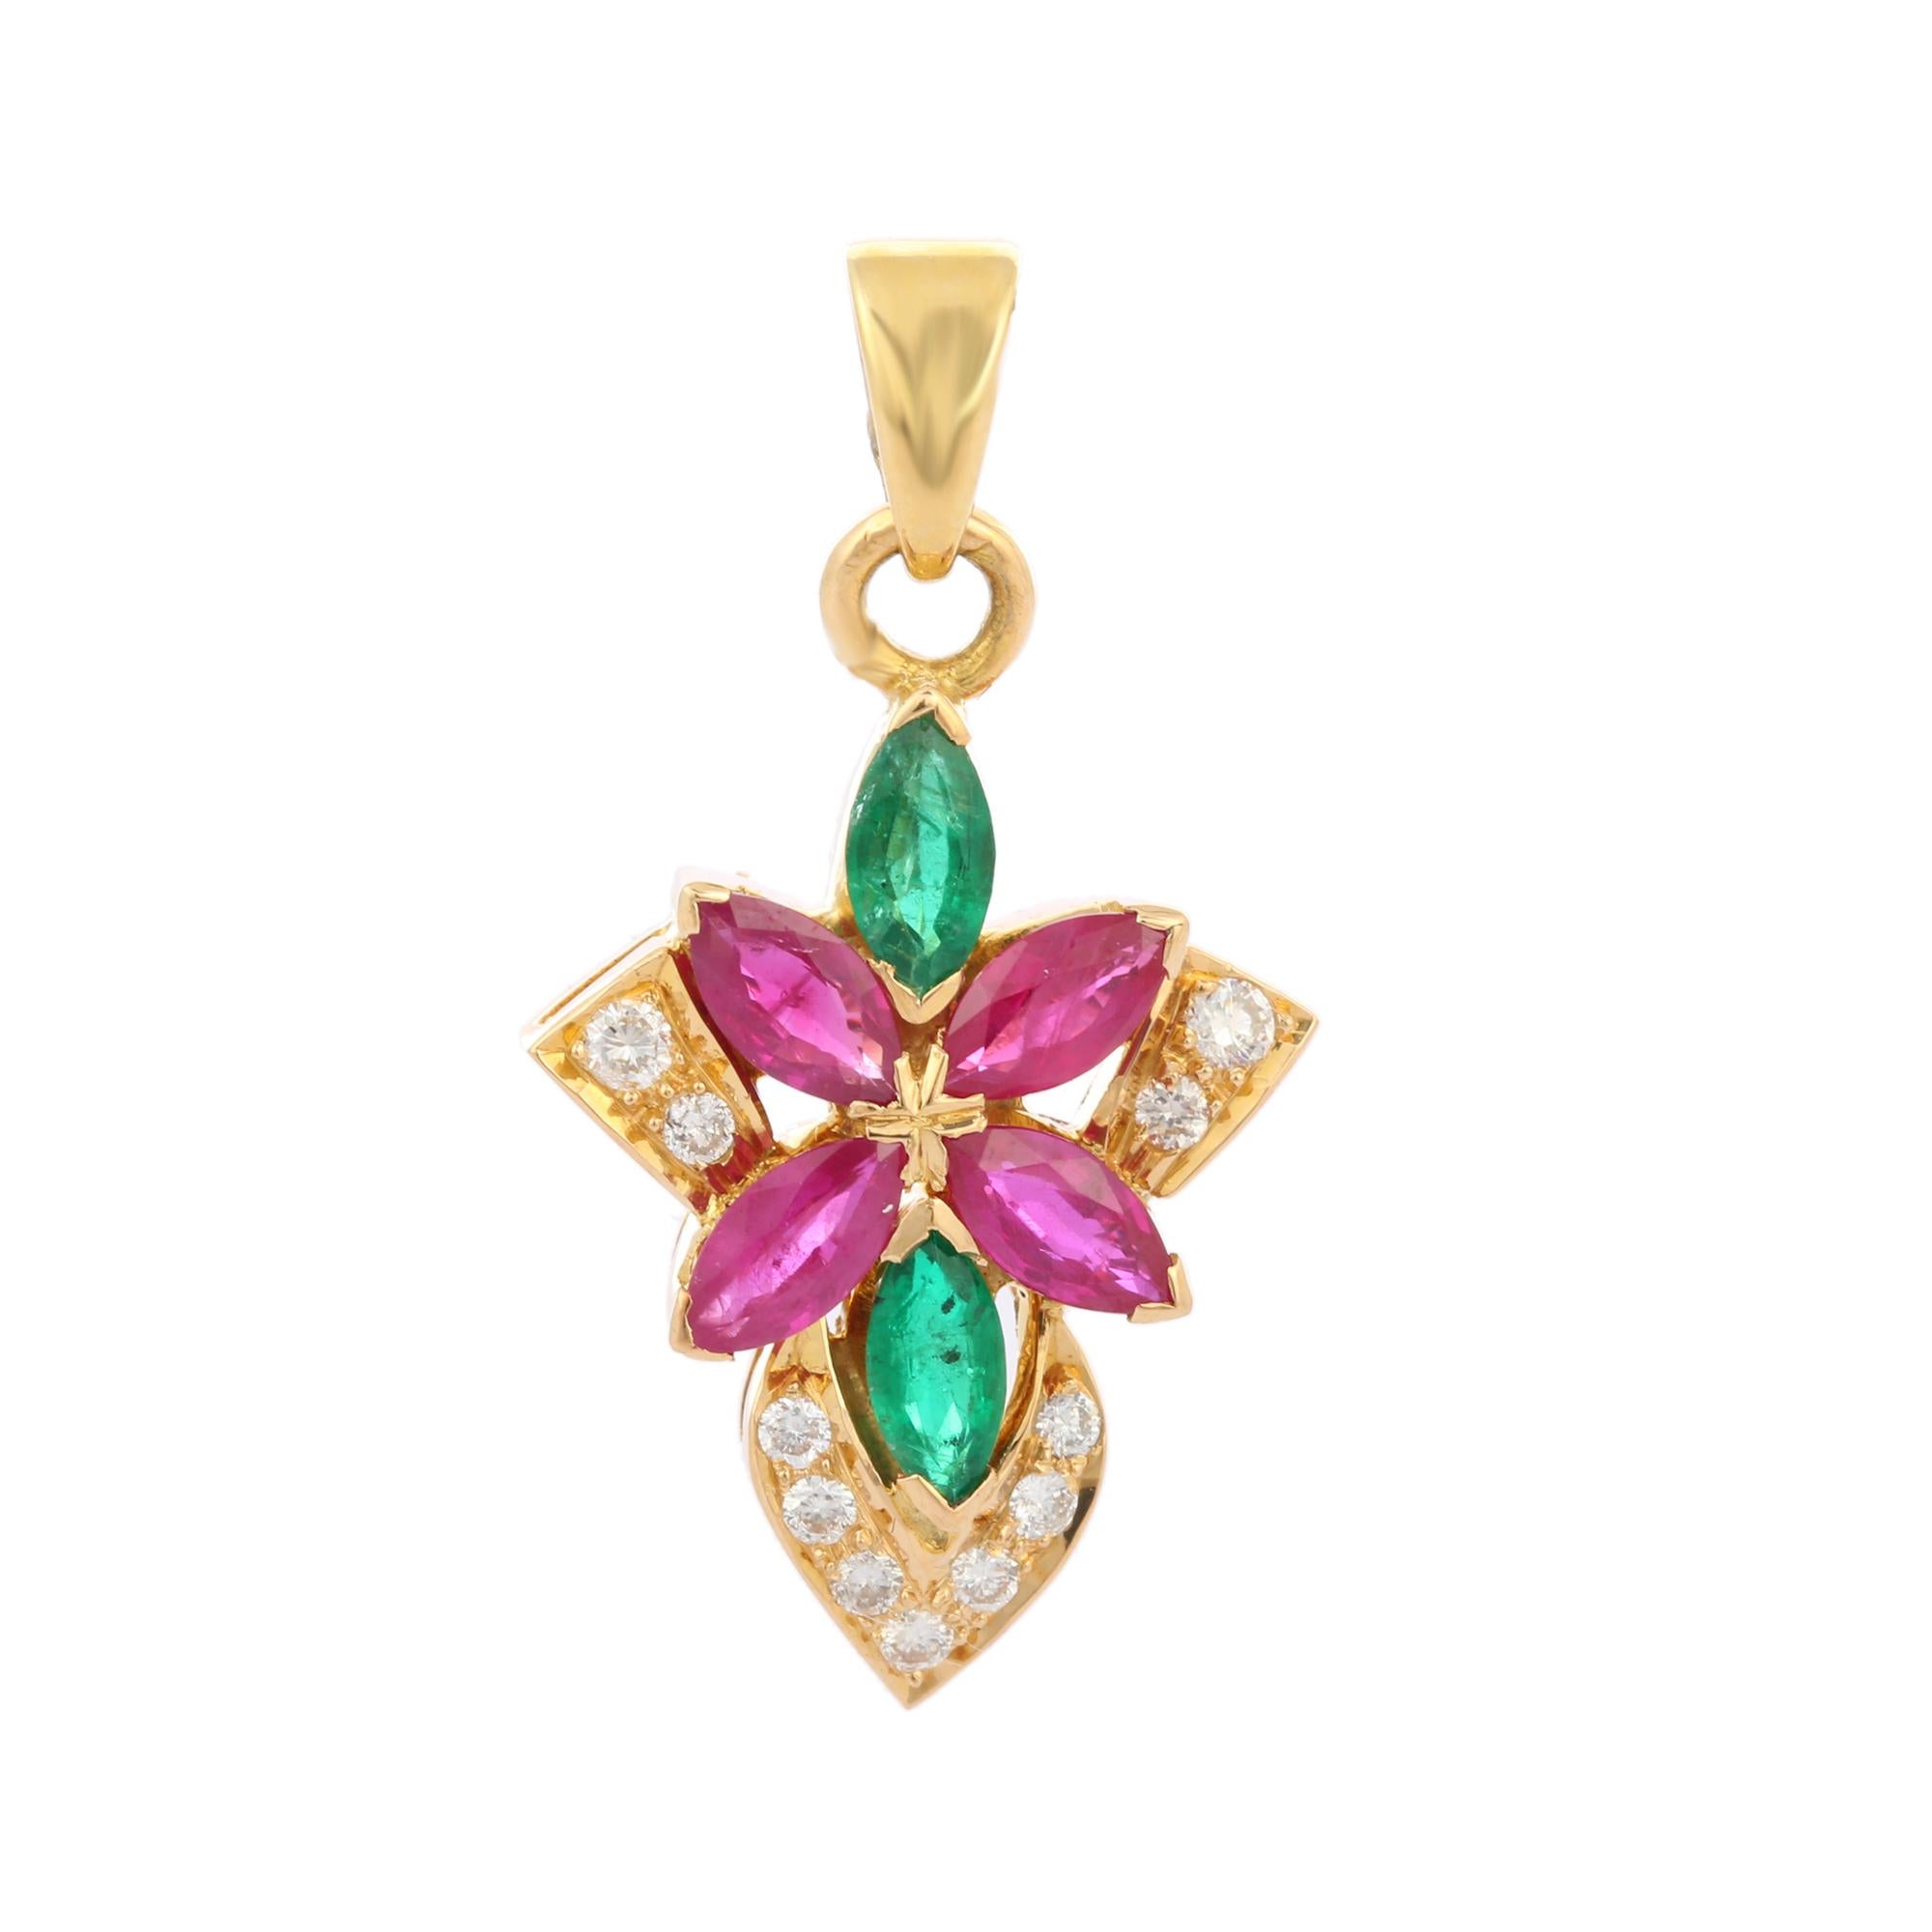 Emerald ruby flower with diamonds pendant necklace flower pendant in 18K Gold. It has a marquise cut gemstone studded with diamonds that completes your look with a decent touch. Pendants are used to wear or gifted to represent love and promises.